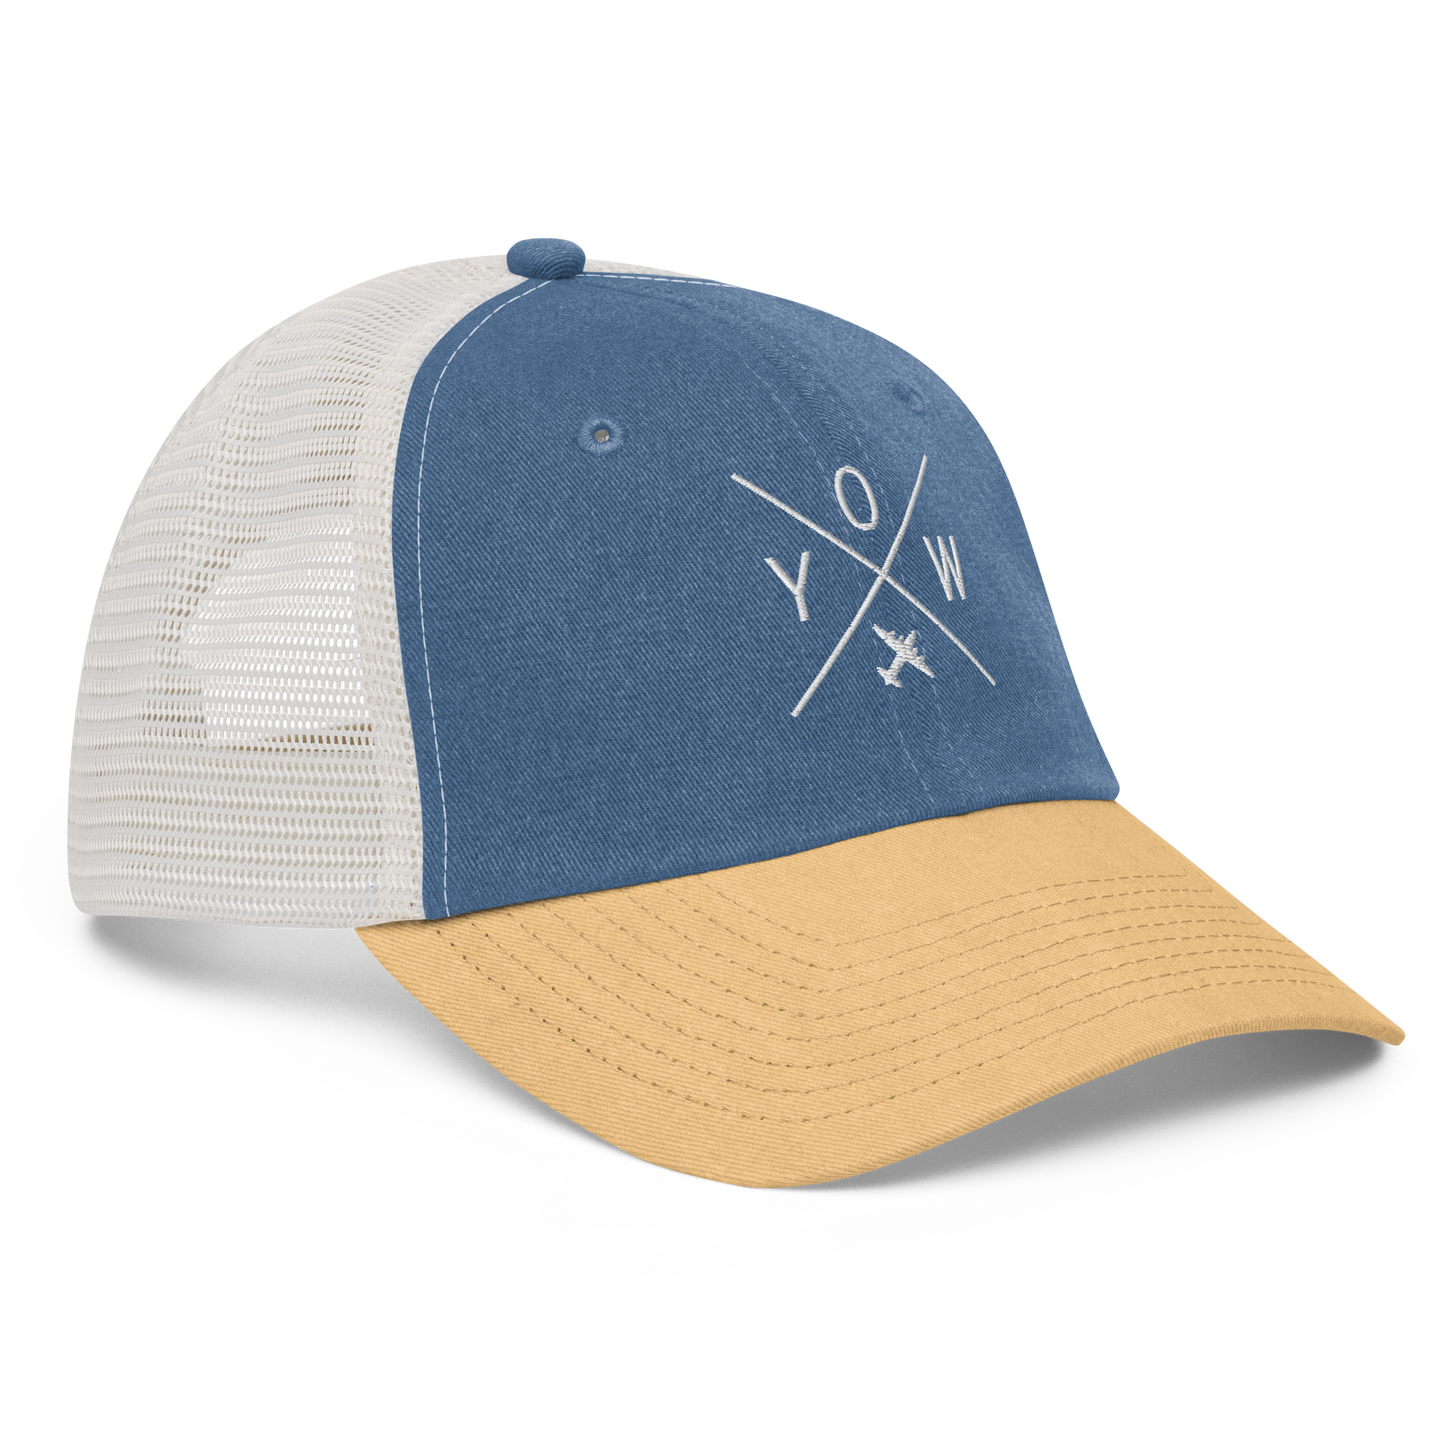 YHM Designs - YOW Ottawa Pigment-Dyed Trucker Cap - Crossed-X Design with Airport Code and Vintage Propliner - White Embroidery - Image 18